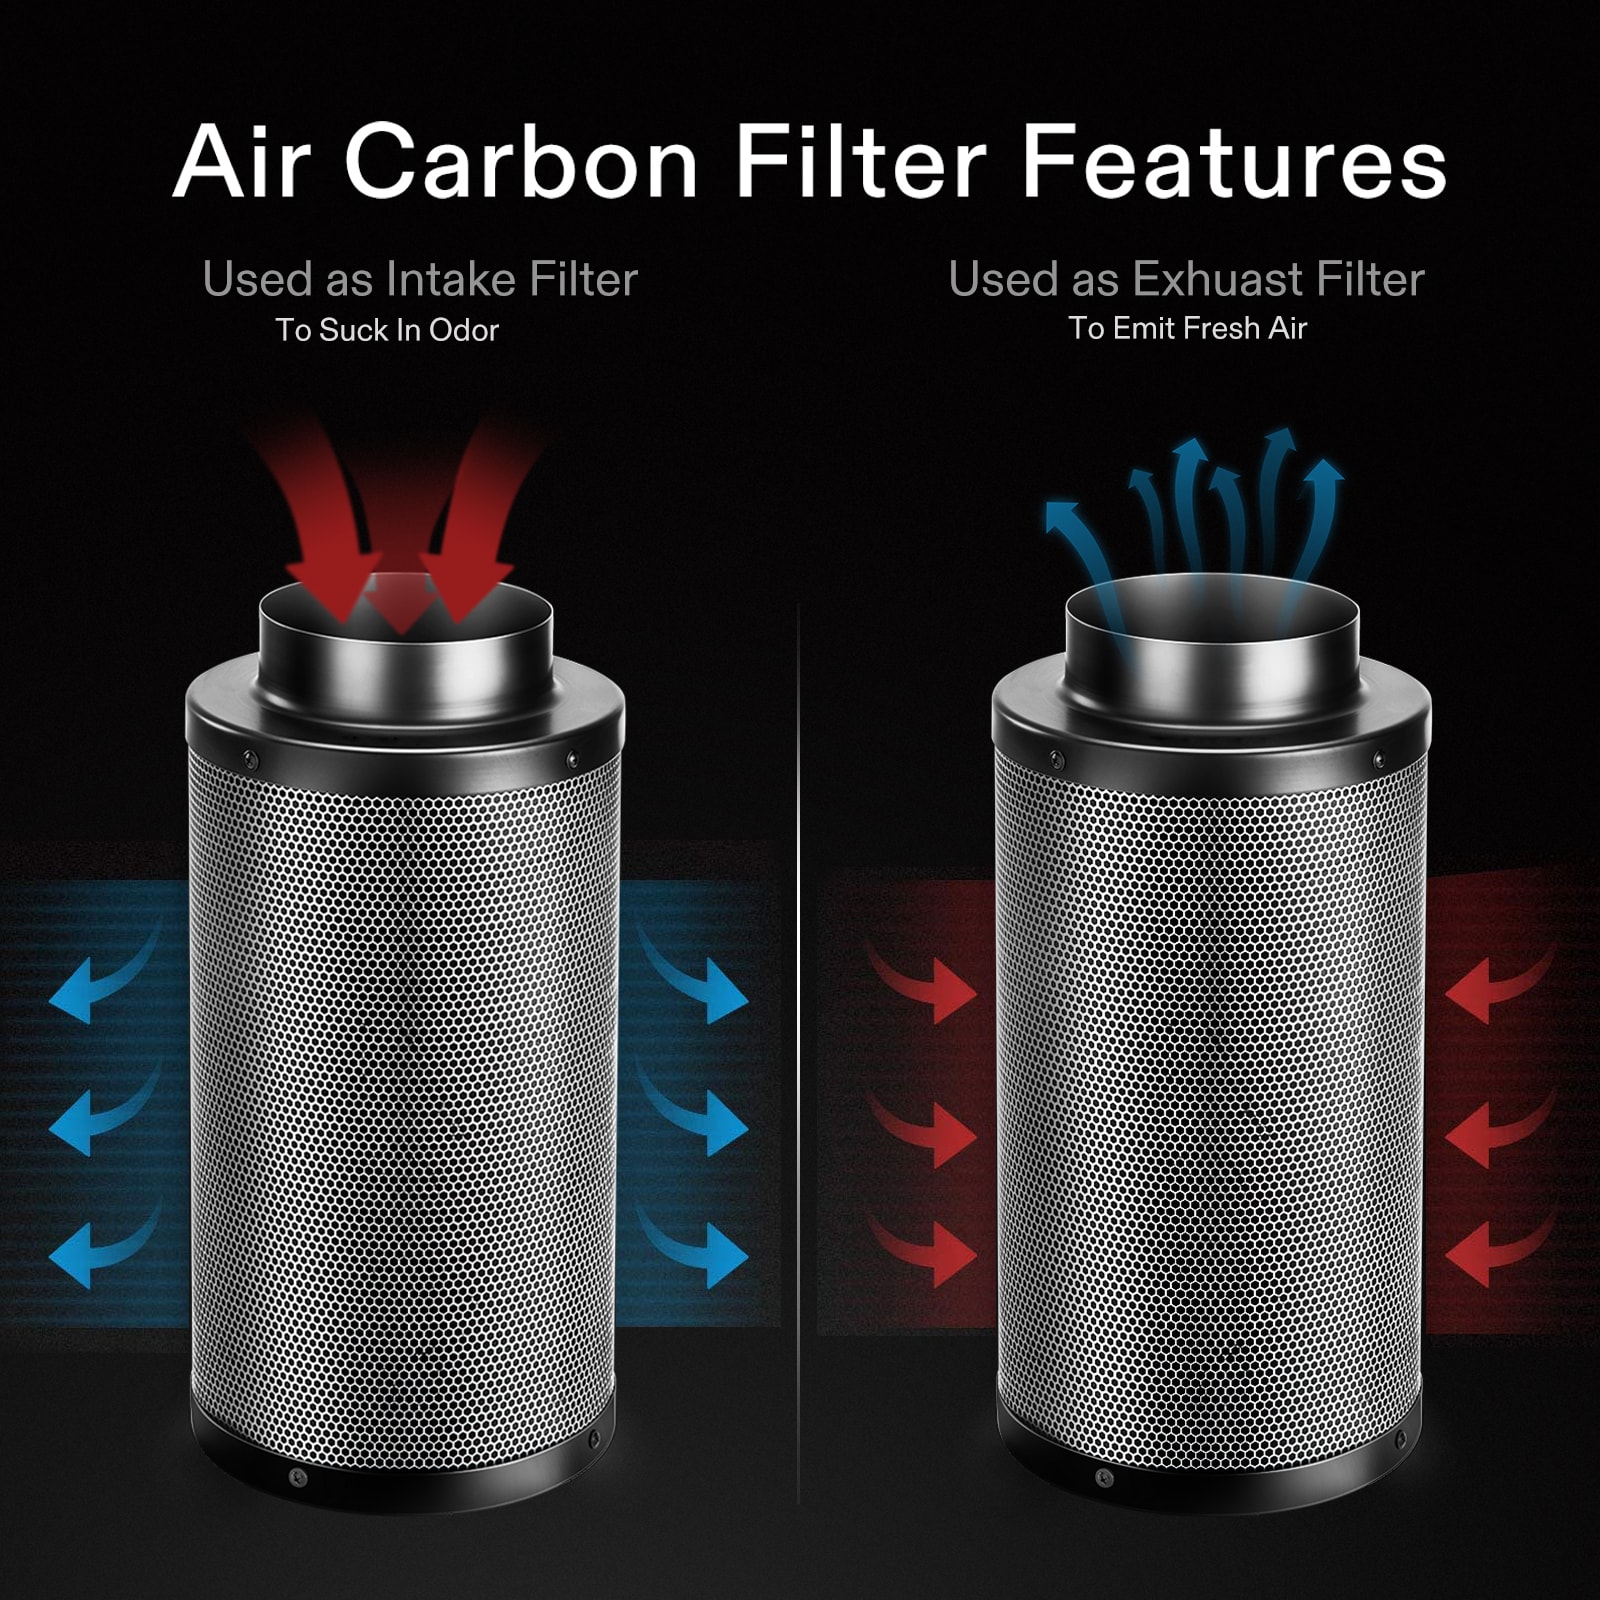 LAYOND 4 Inch Activated Air Carbon Filter for Ventilation System LYD-VS4 with Australia Virgin Charcoal,Grow Tent Odor Eliminating Active Carbon Filter with Pre-Filter Included 